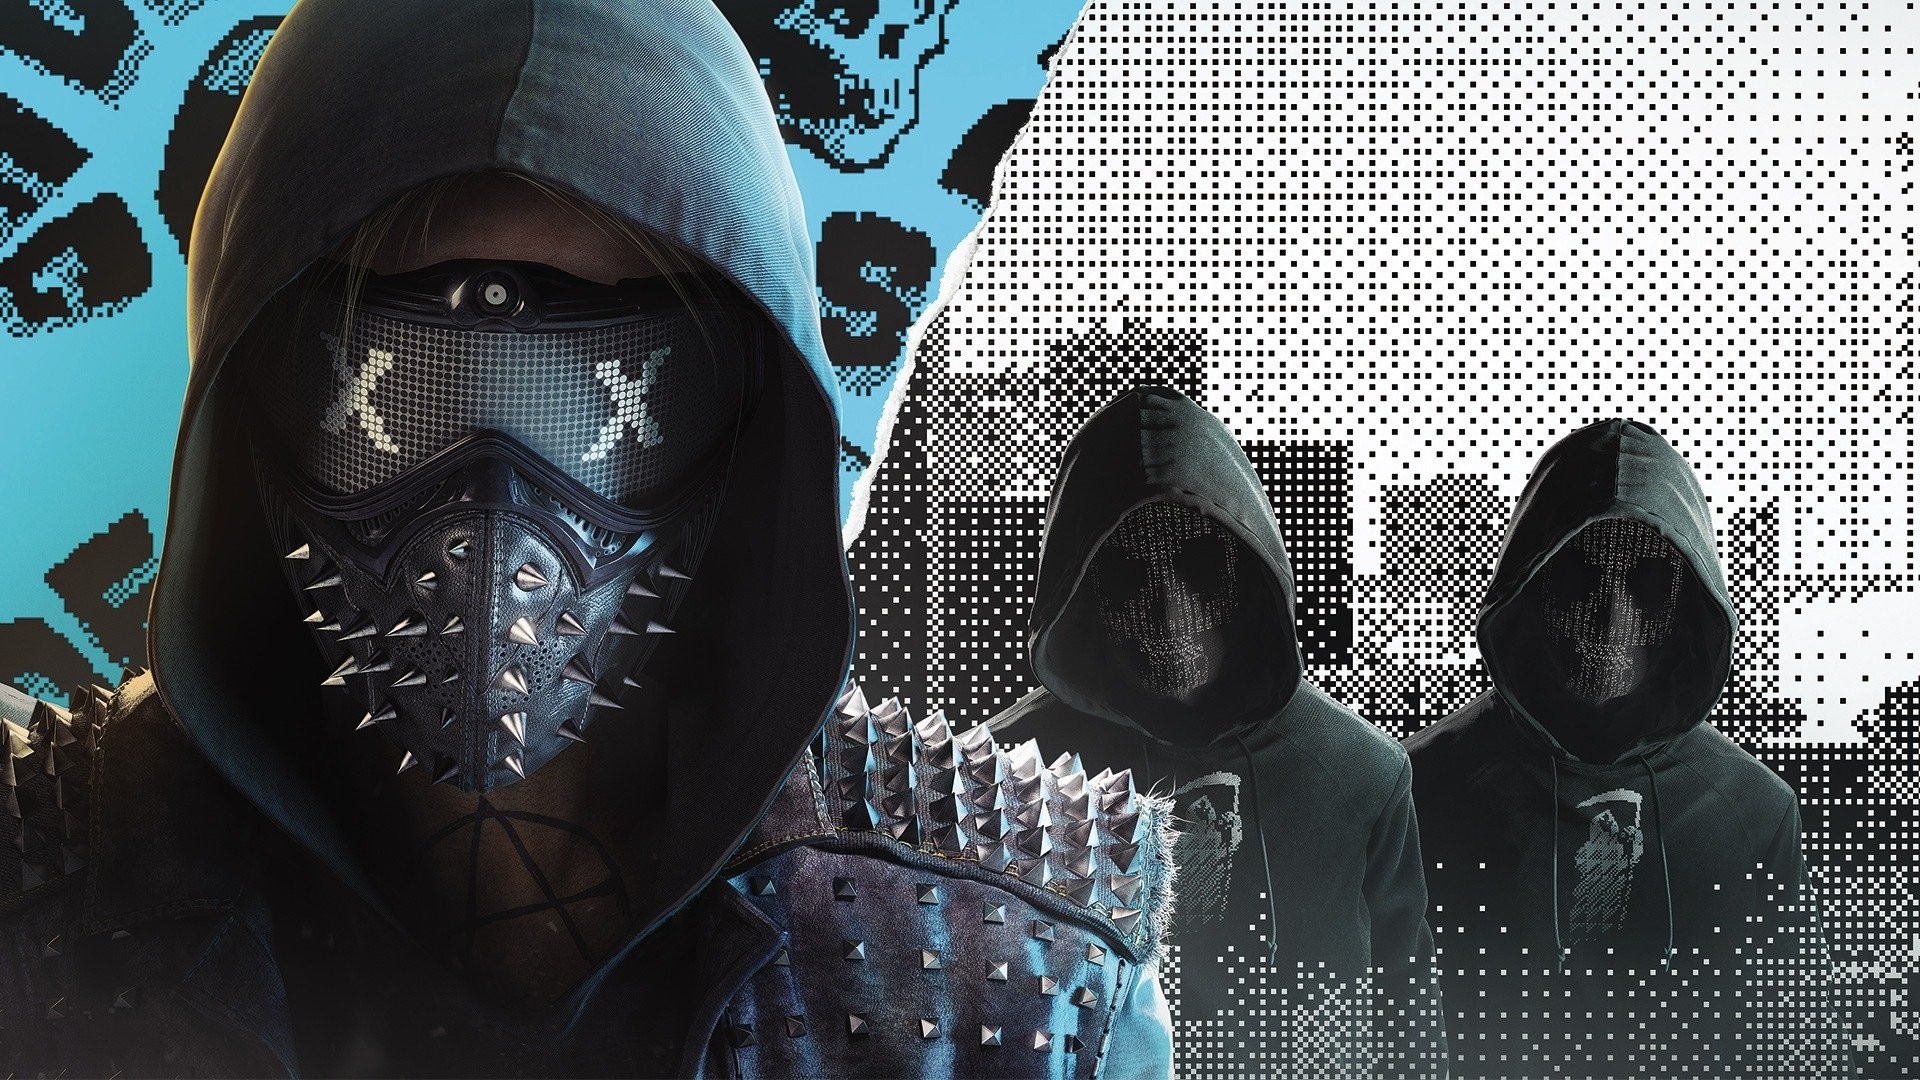 Watch Dogs 2 Wallpaper ① Download Free Beautiful Wallpapers For